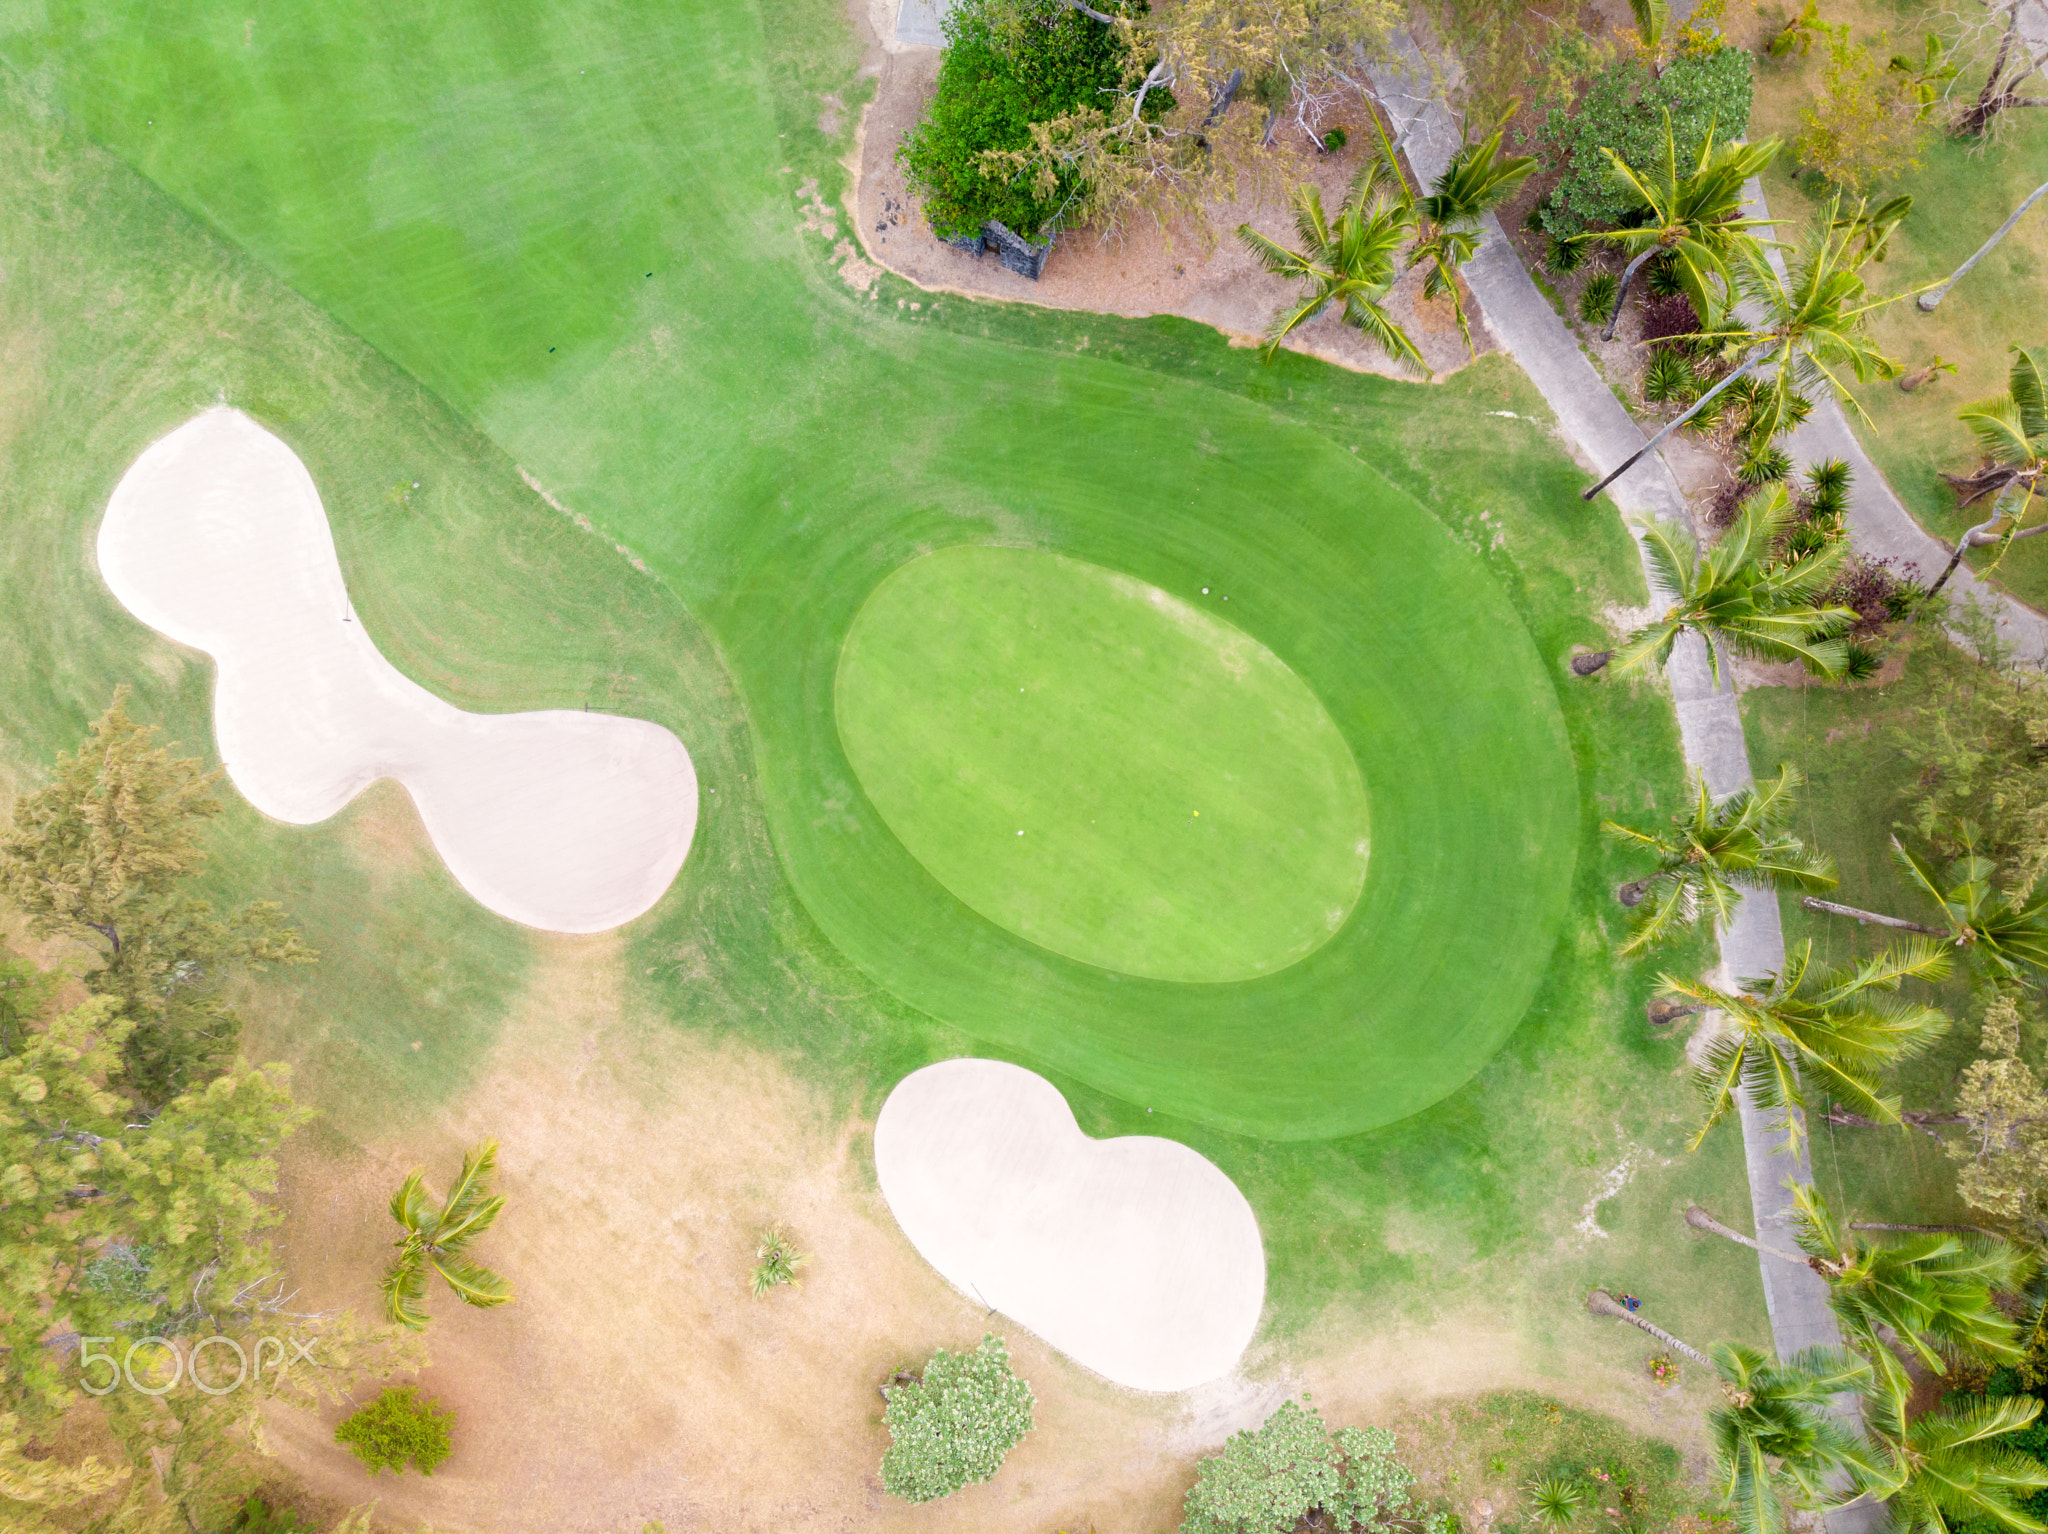 Birds eye view of golf course hole green and sand traps.